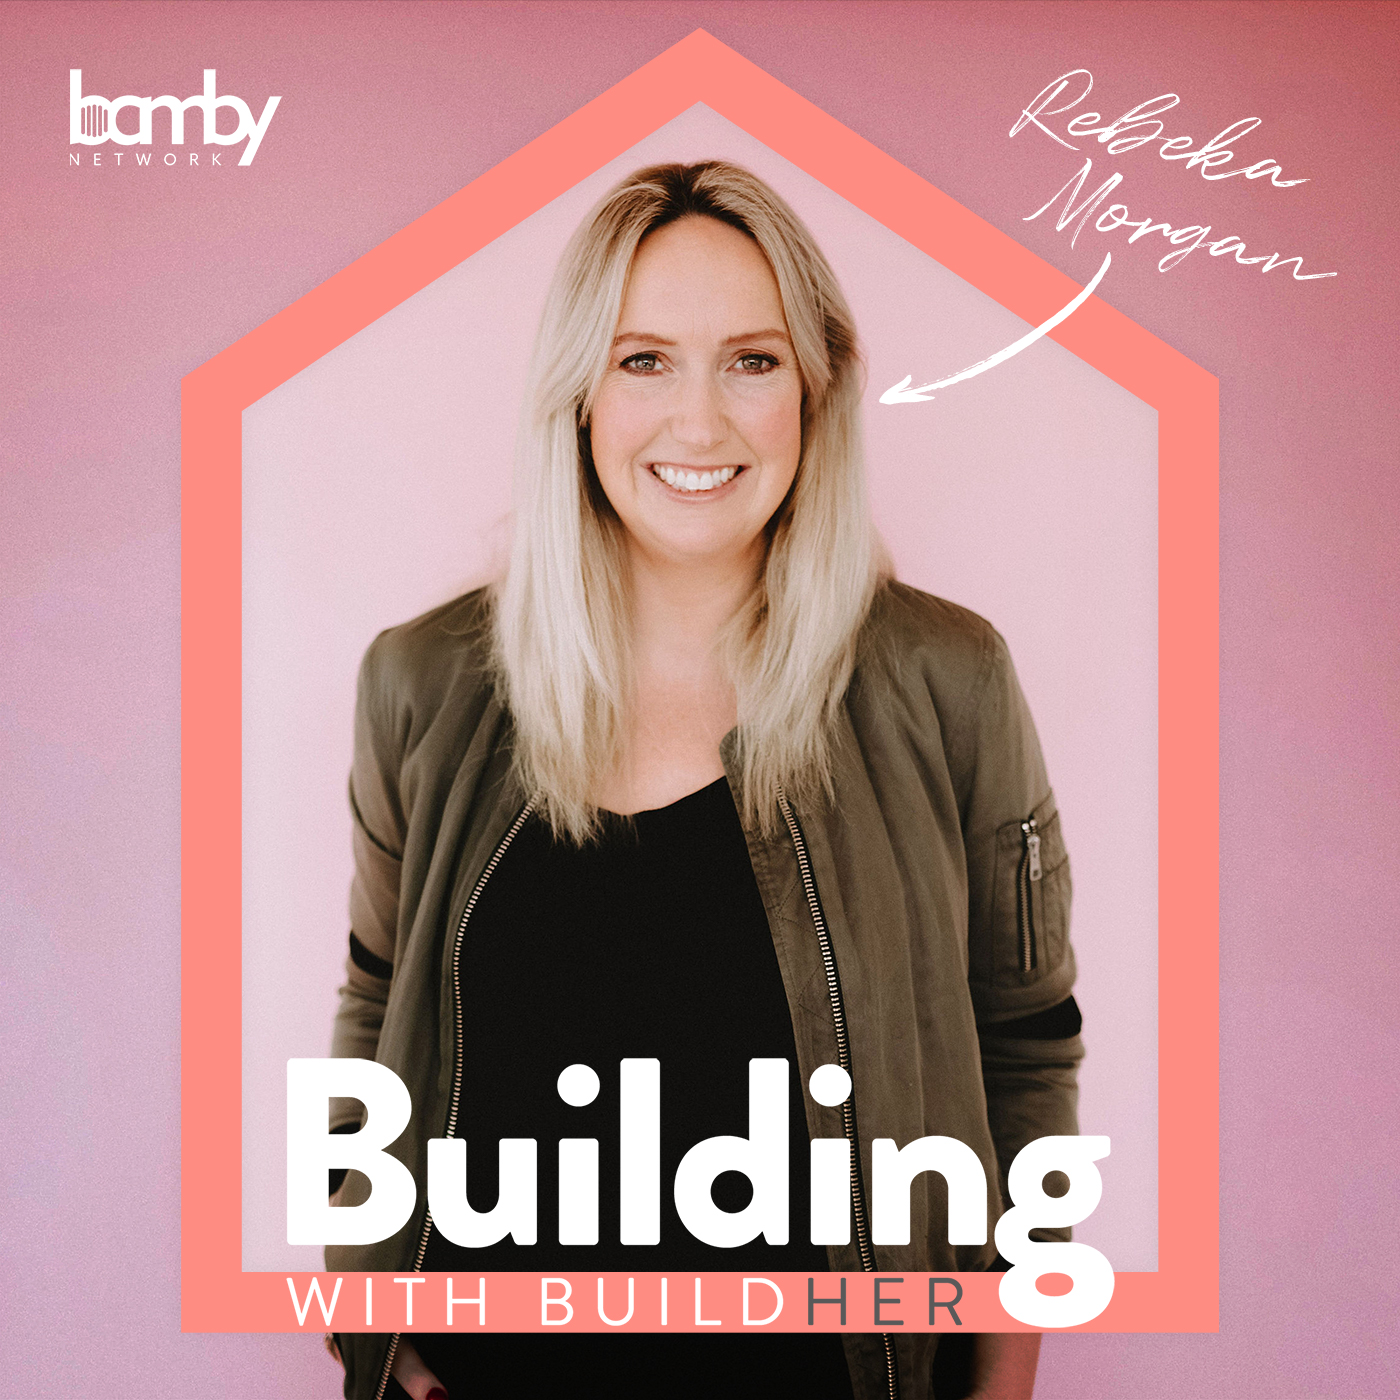 Making the leap from construction to developing with Bec Wells